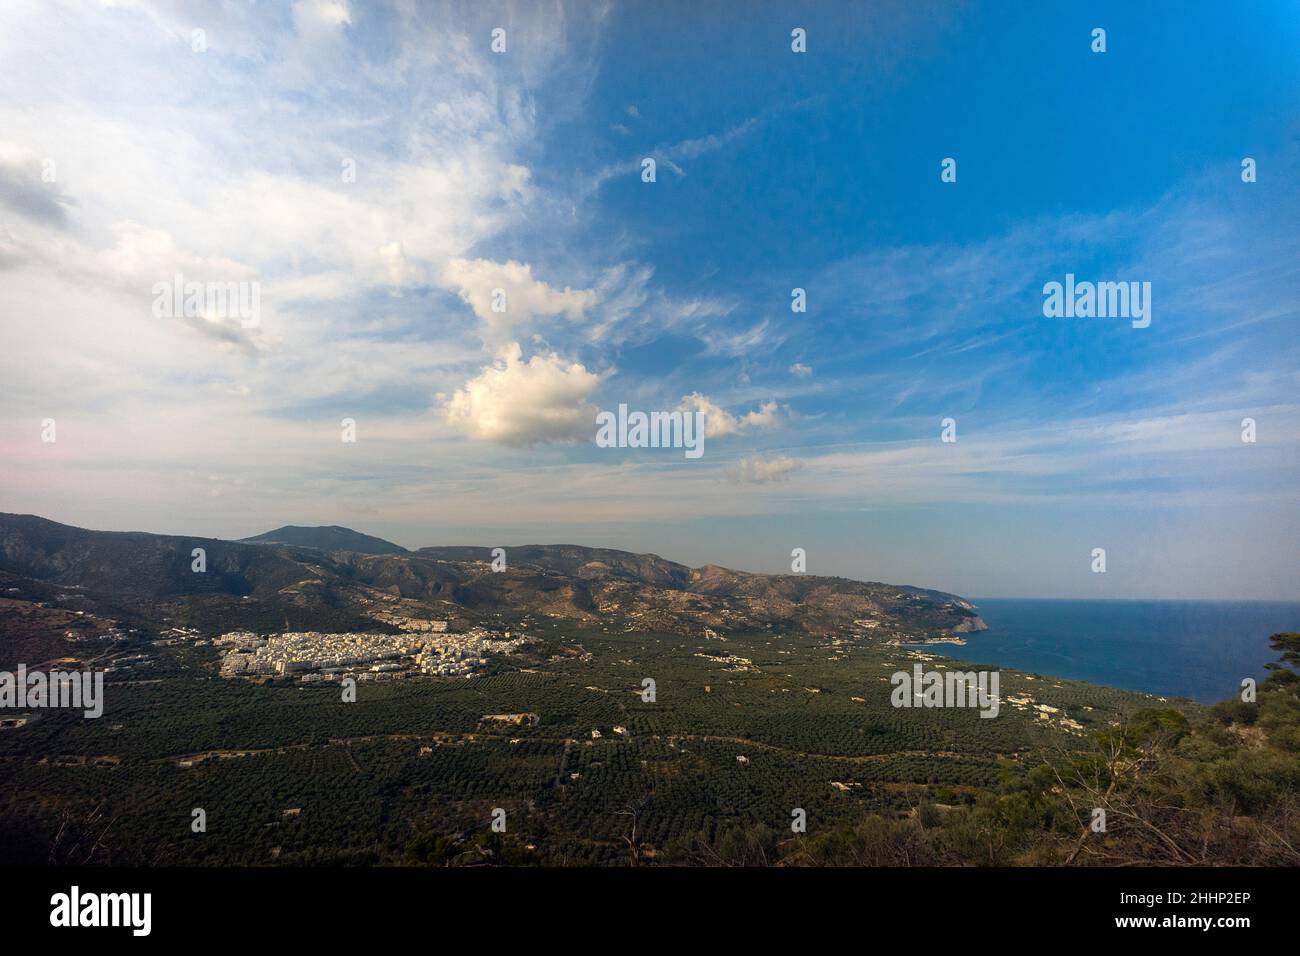 Mattinata, Puglia, Italy: panoramic image of the city surrounded by olive trees with adriatic sea on the right Stock Photo